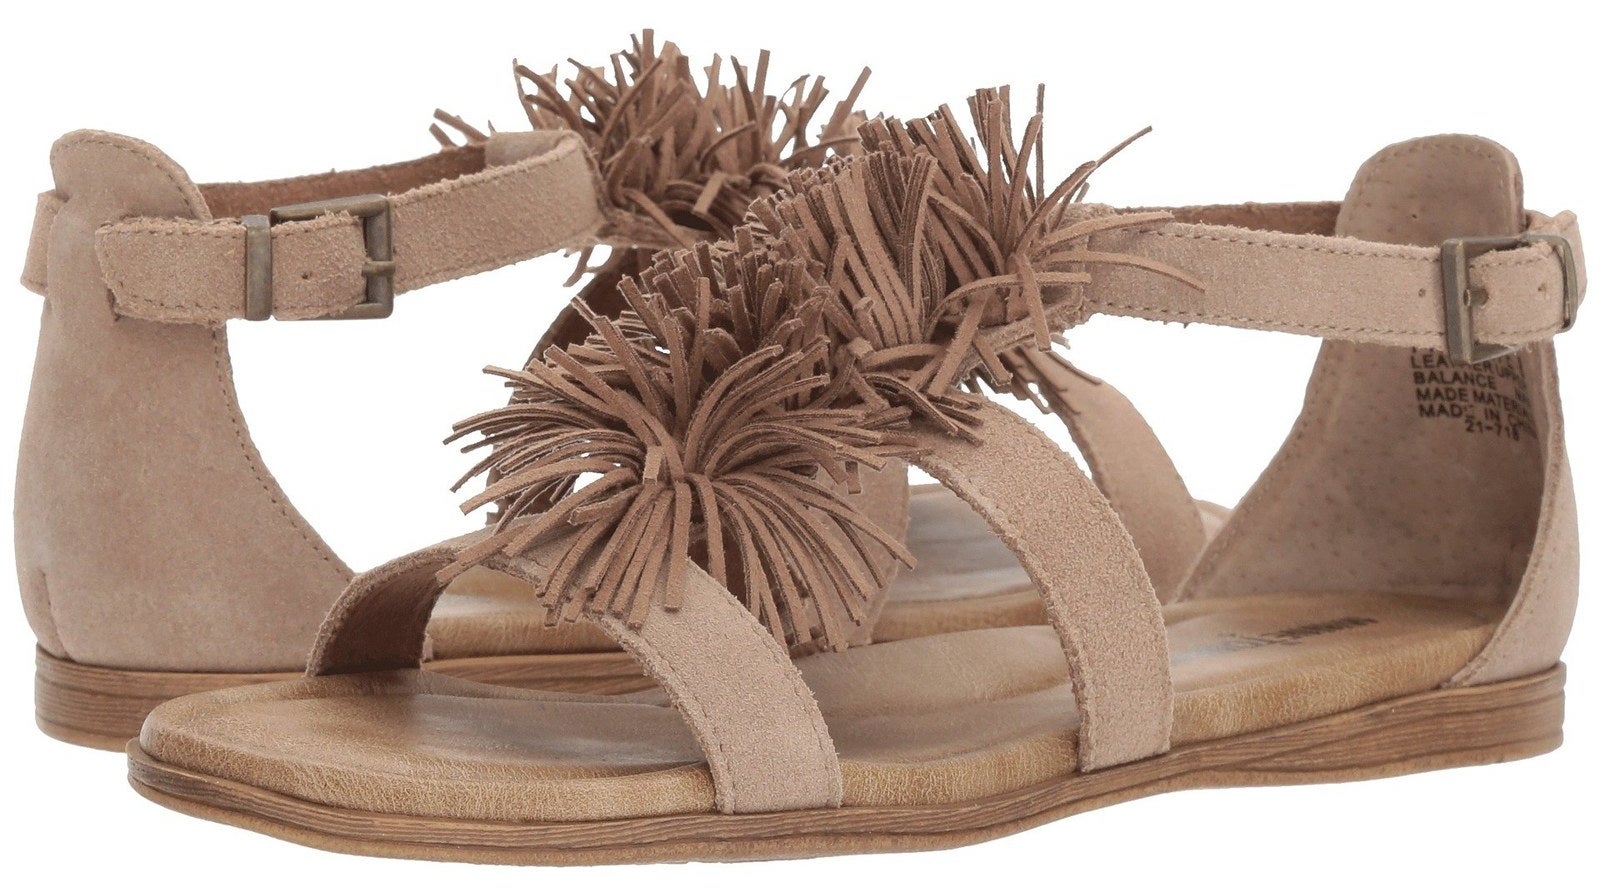 30 Of The Best Sandals You Can Get From Zappos